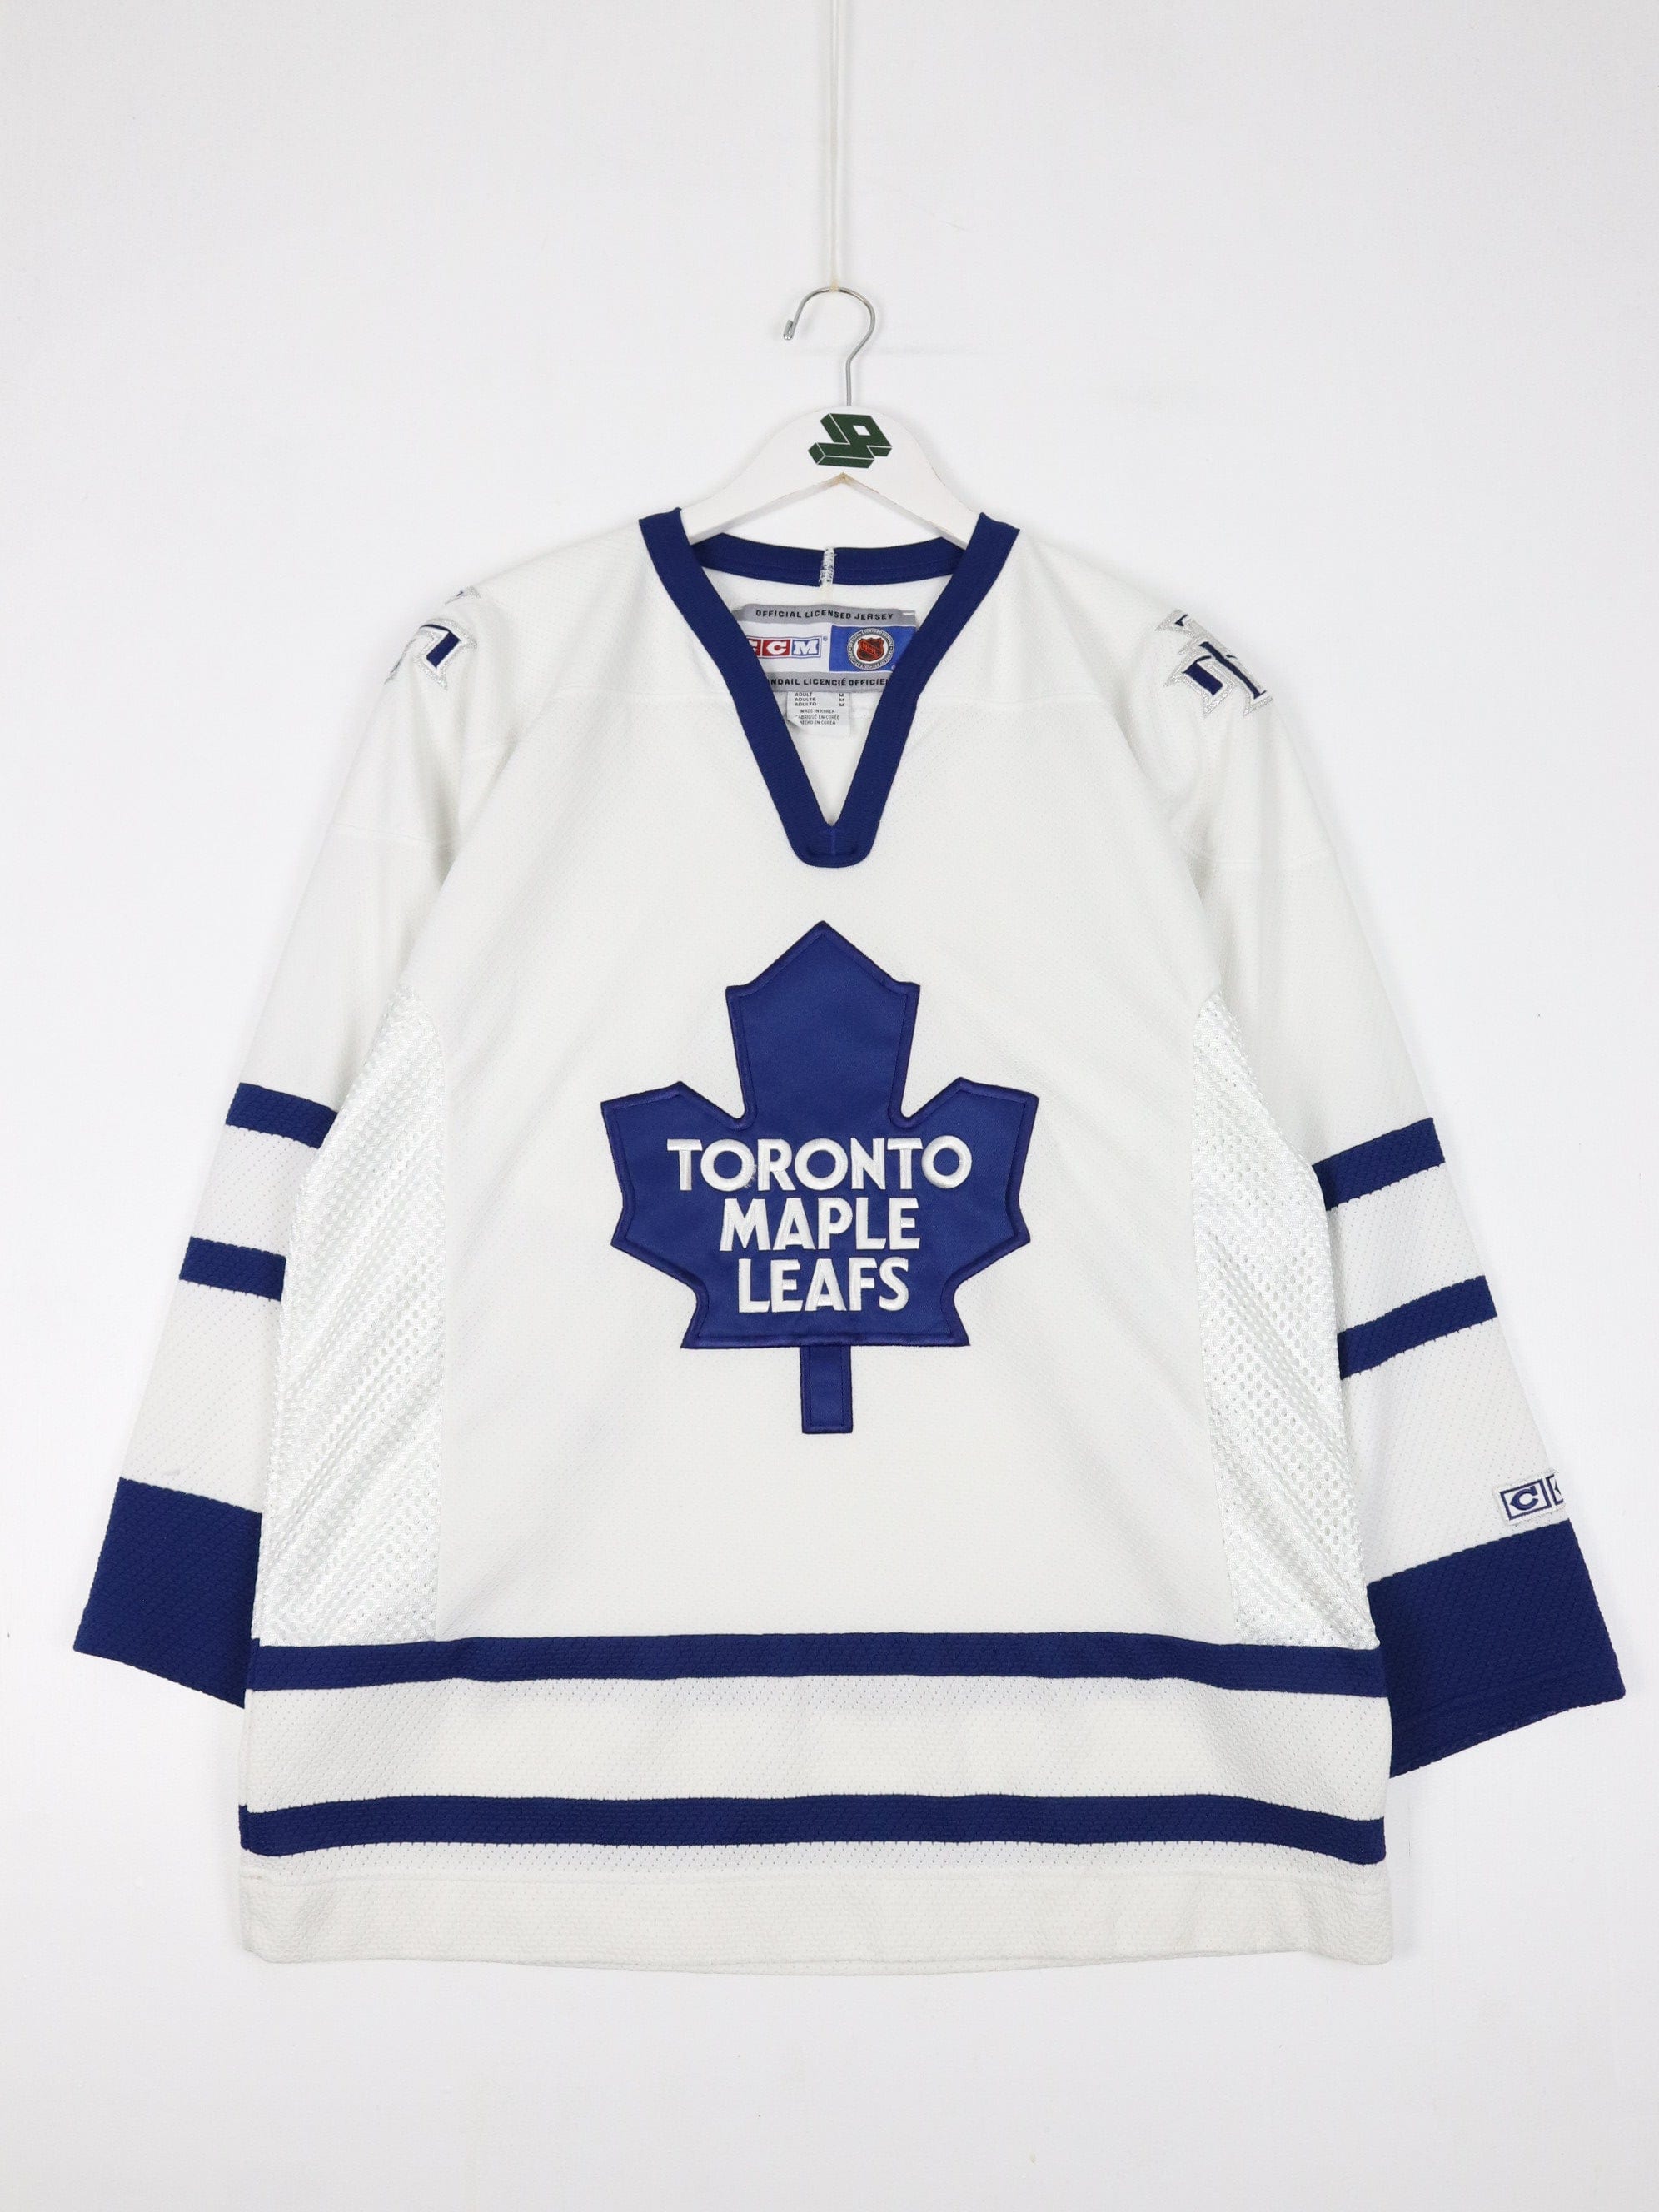 Vintage Toronto Maple Leafs Ccm Hockey Jersey Size Small Blue Nhl Made In  Canada